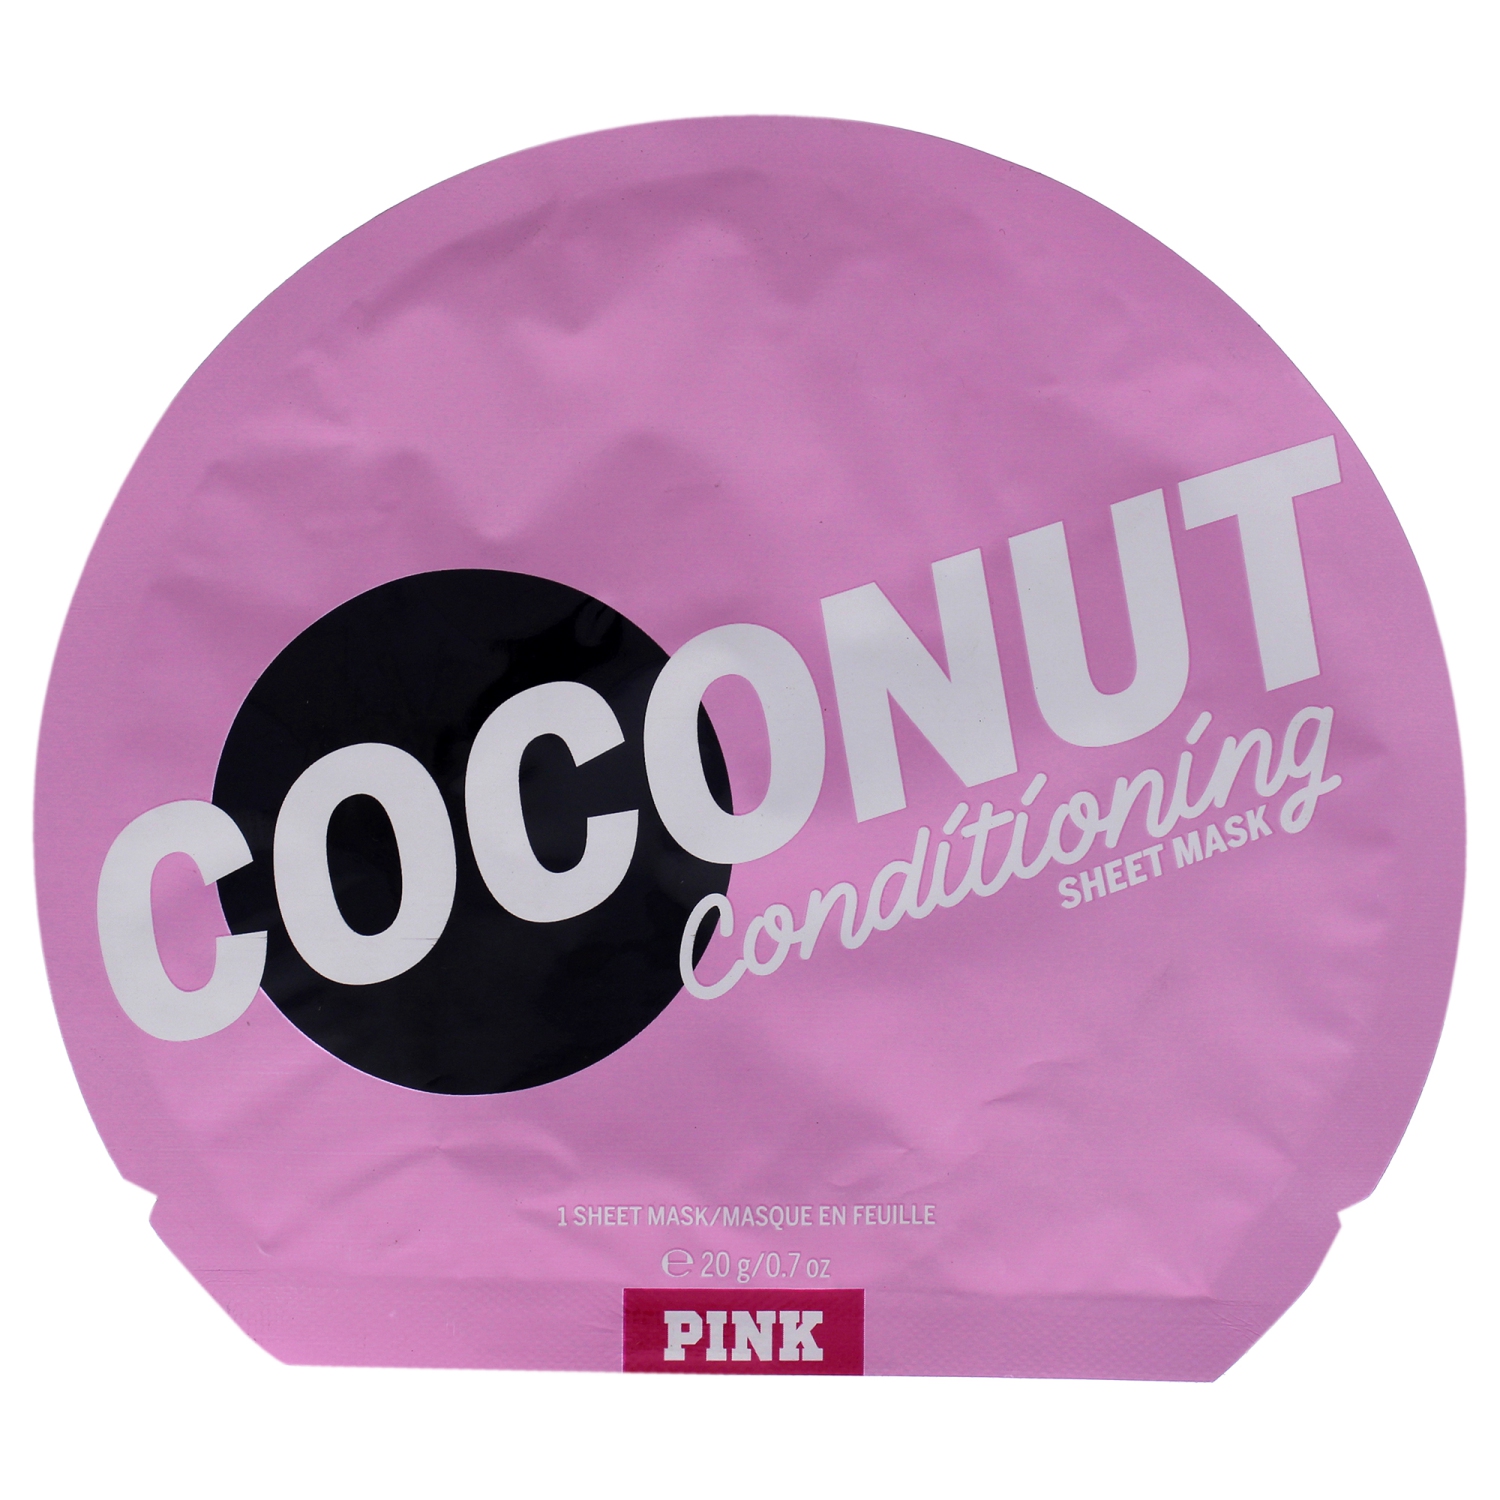 Coconut Conditioning Sheet Mask by Victorias Secret for Unisex - 1 Pc Mask